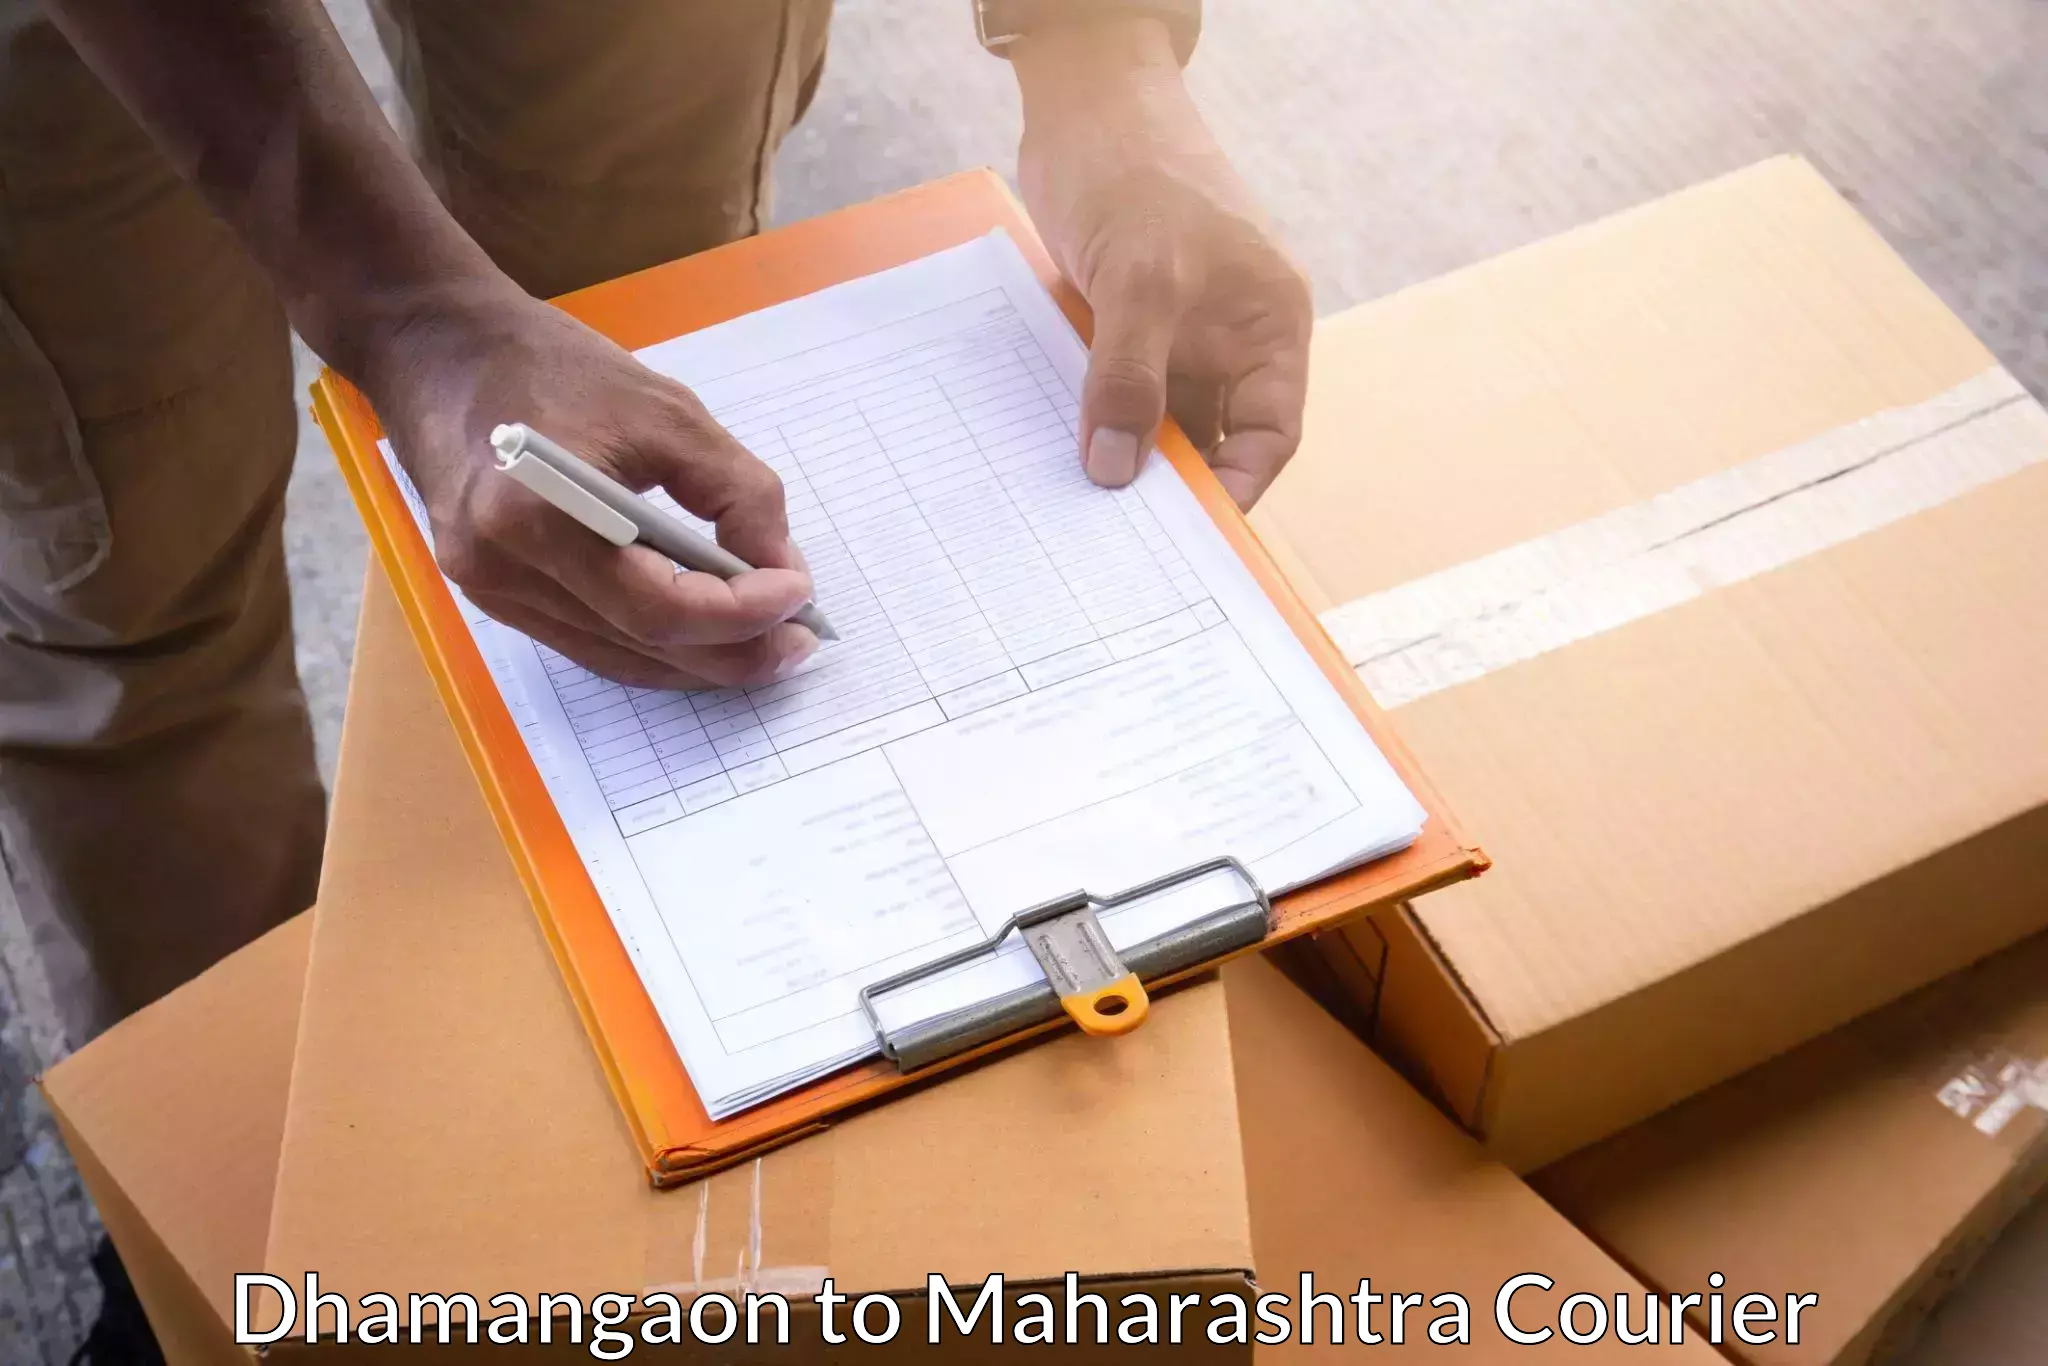 Parcel service for businesses Dhamangaon to Vaijapur